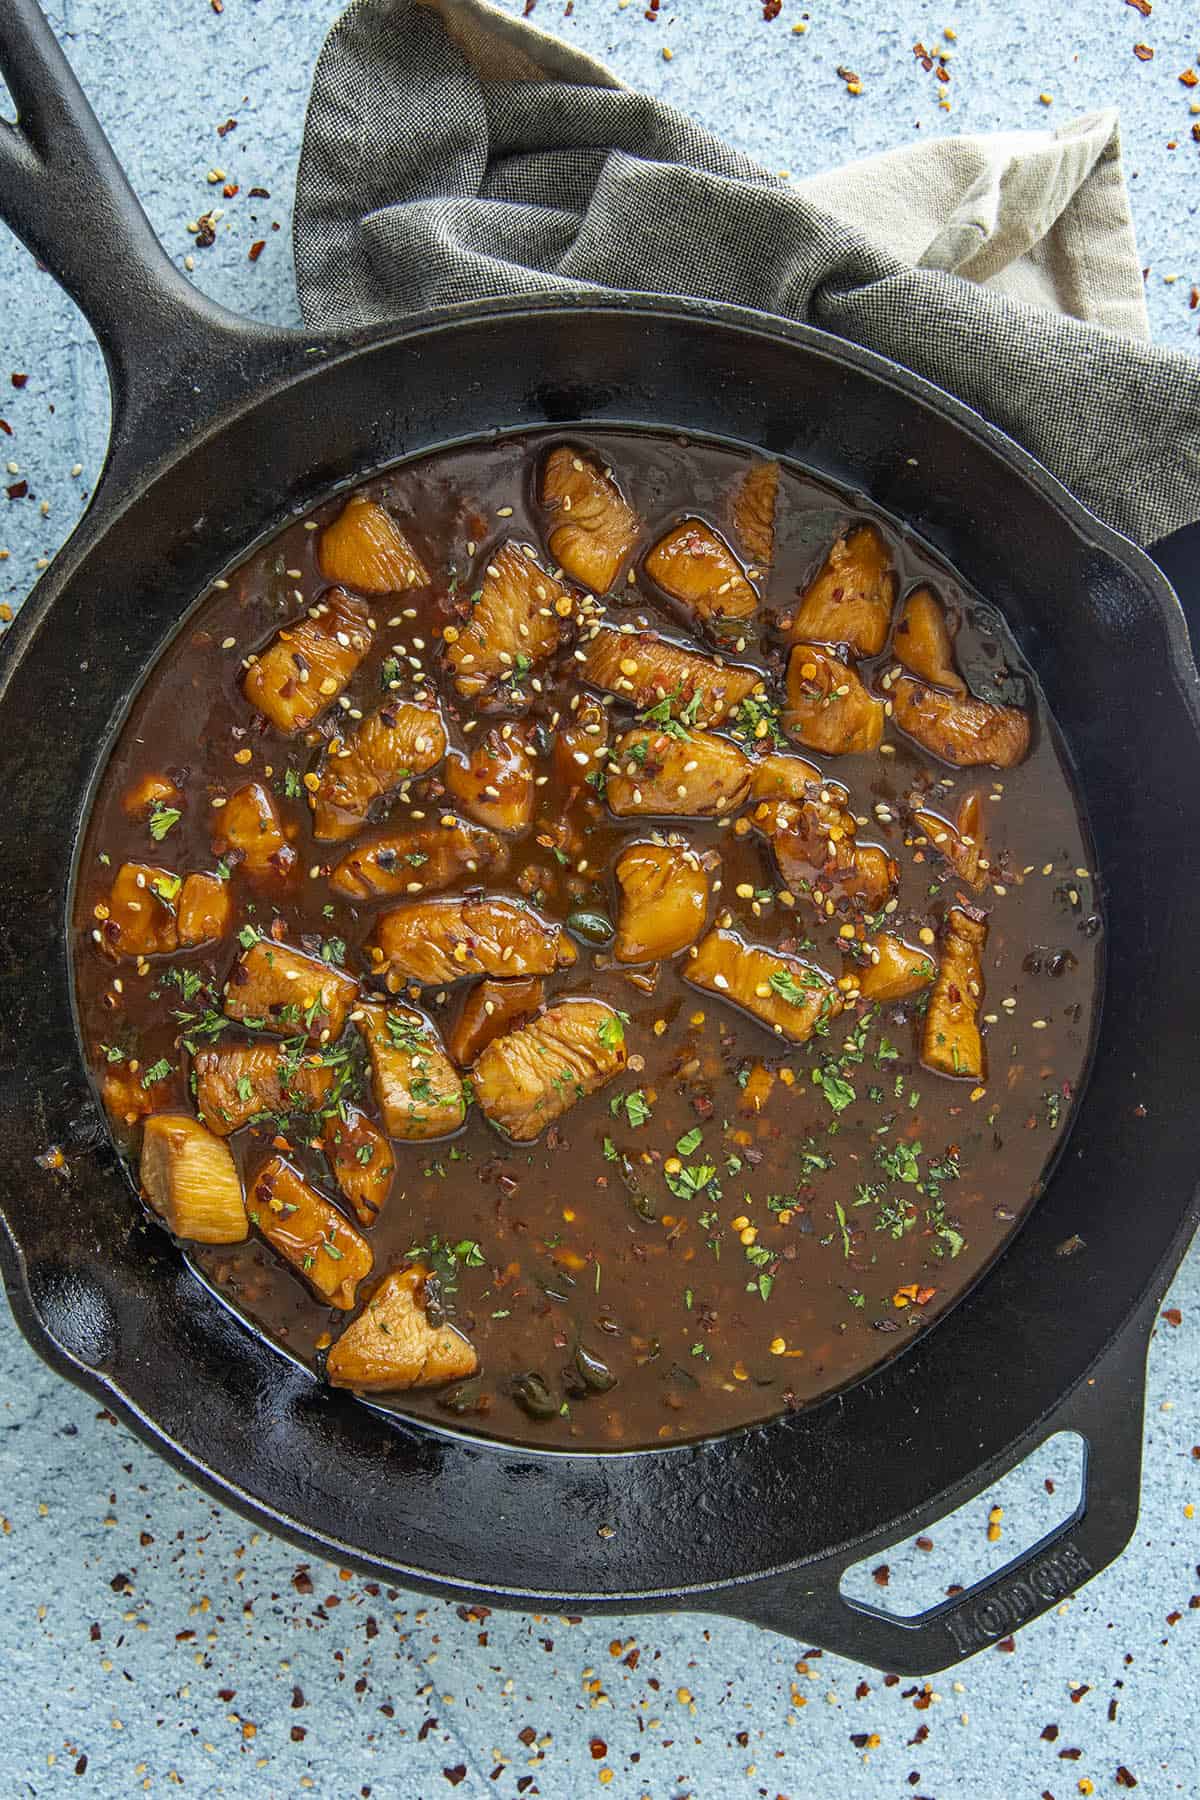 Teriyaki Chicken in a hot pan, ready to serve